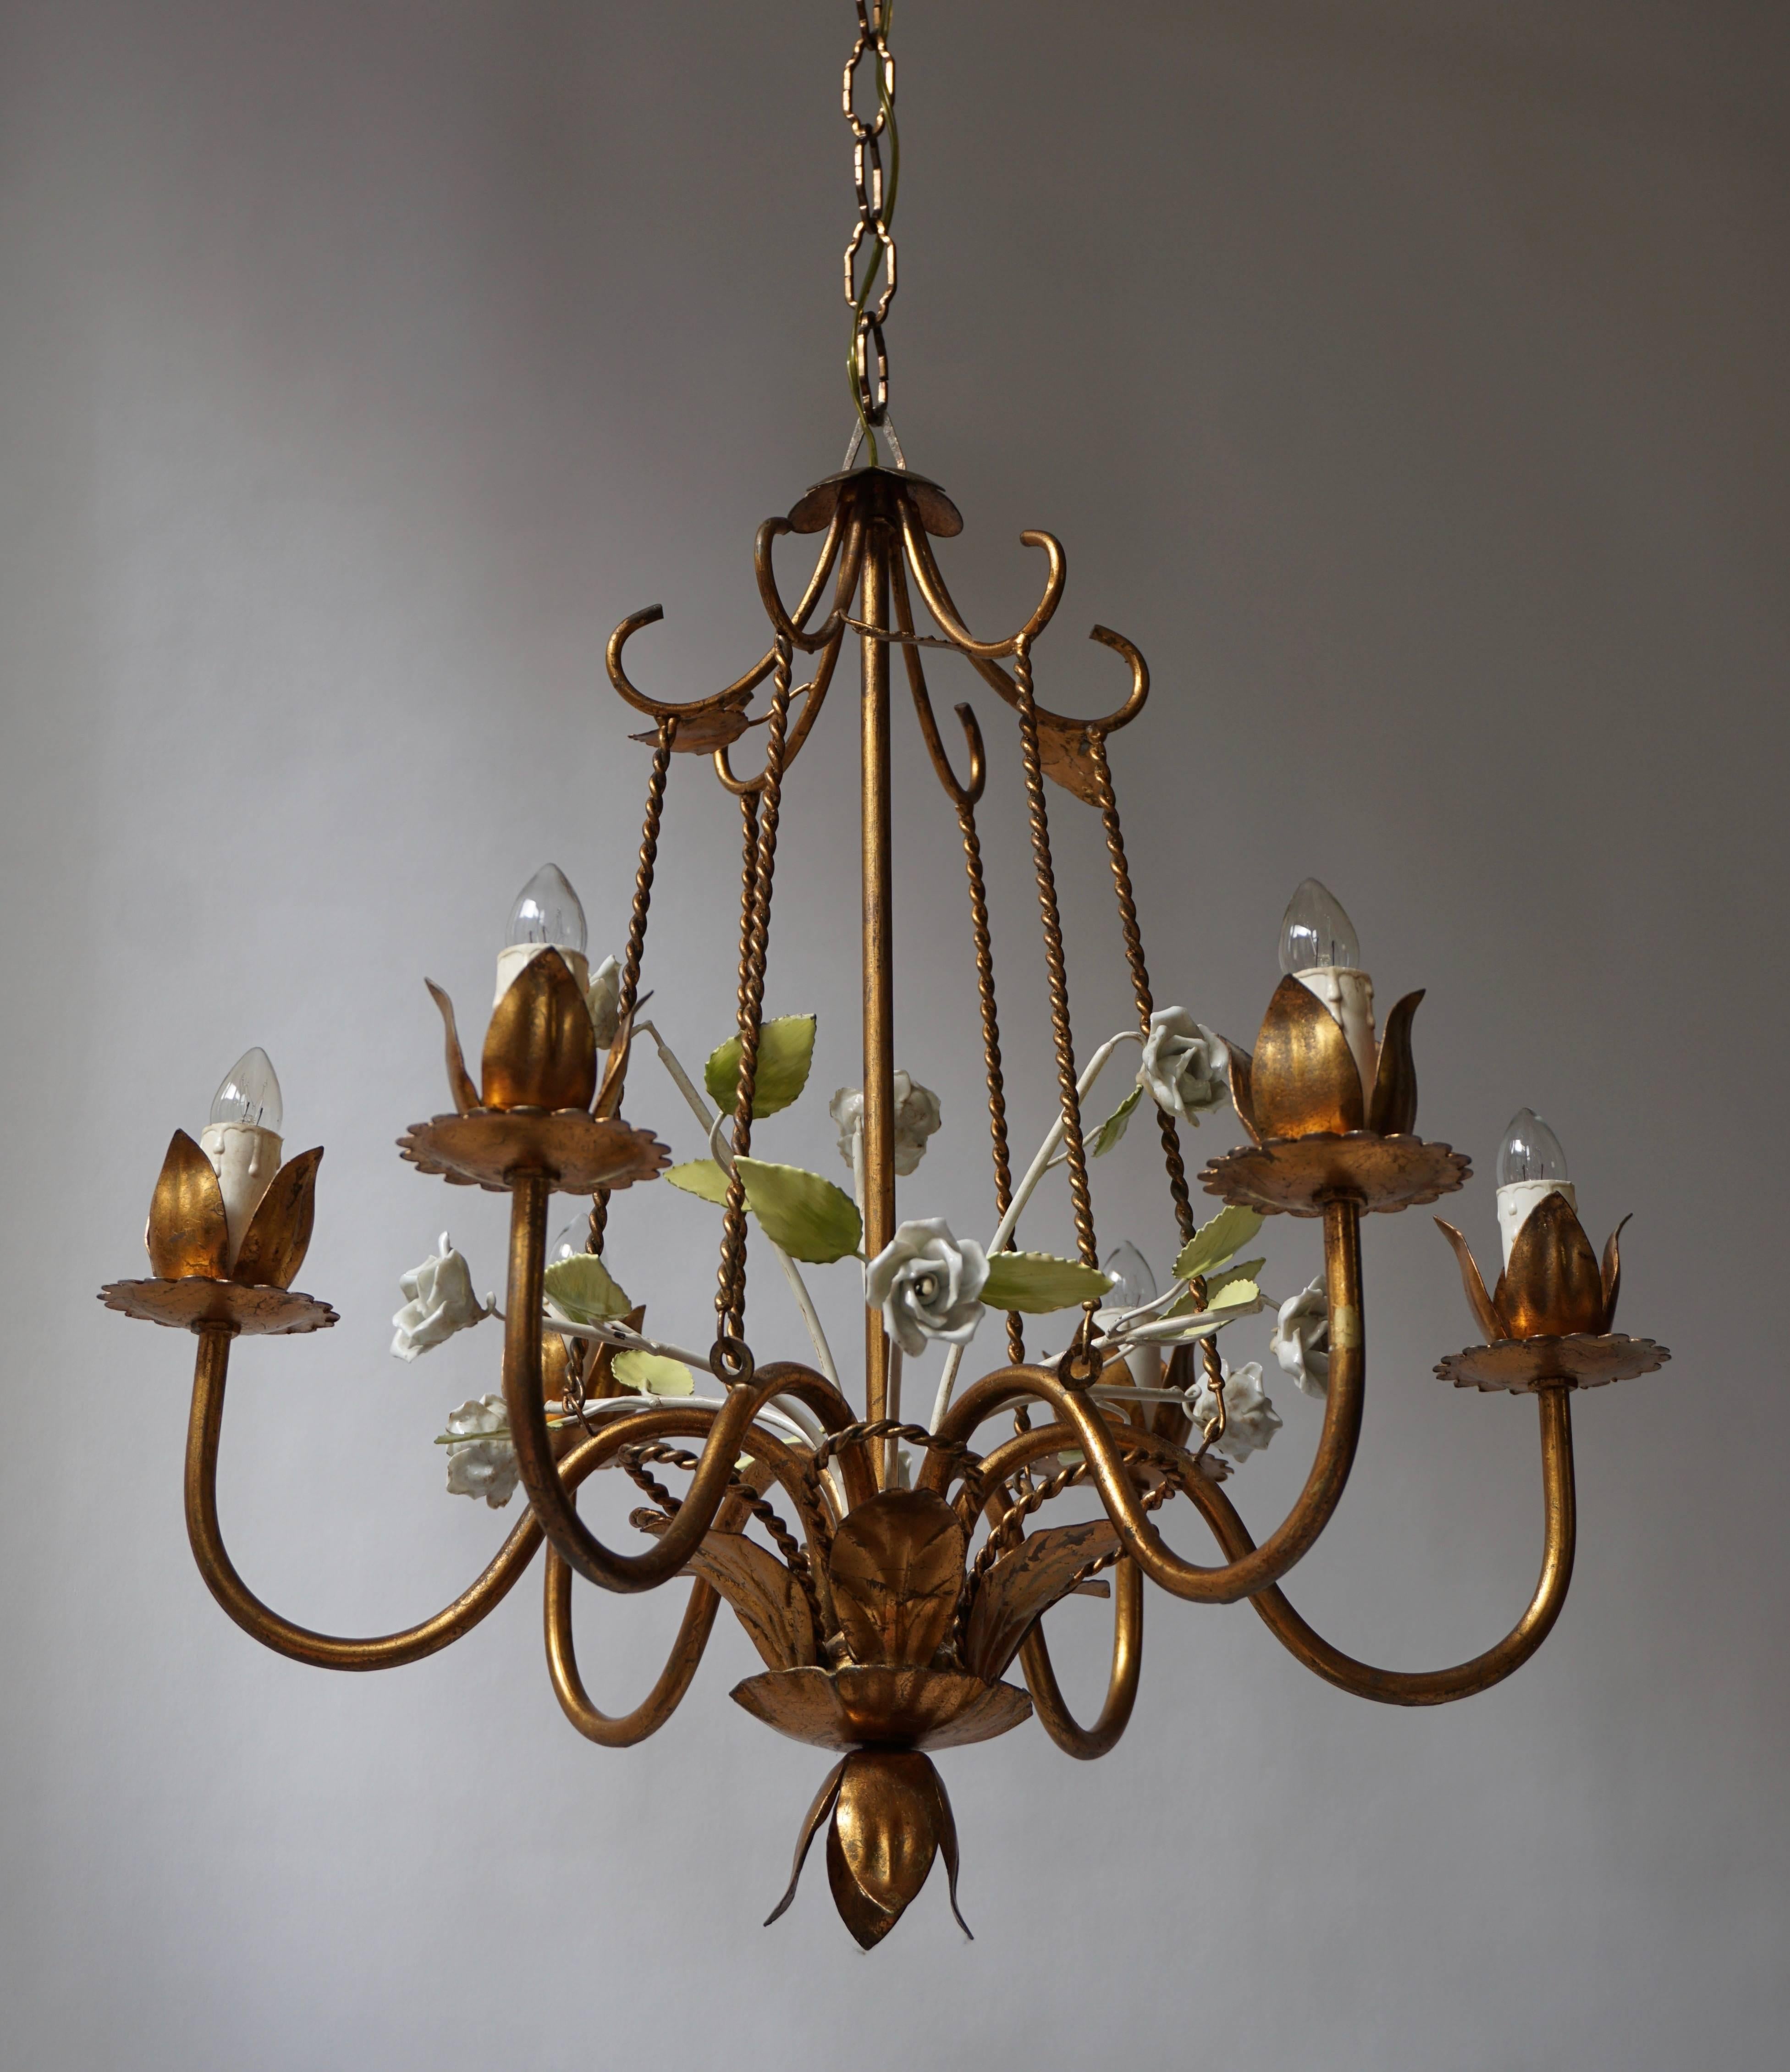 Italian Brass Chandelier with Porcelain Flowers In Good Condition For Sale In Antwerp, BE